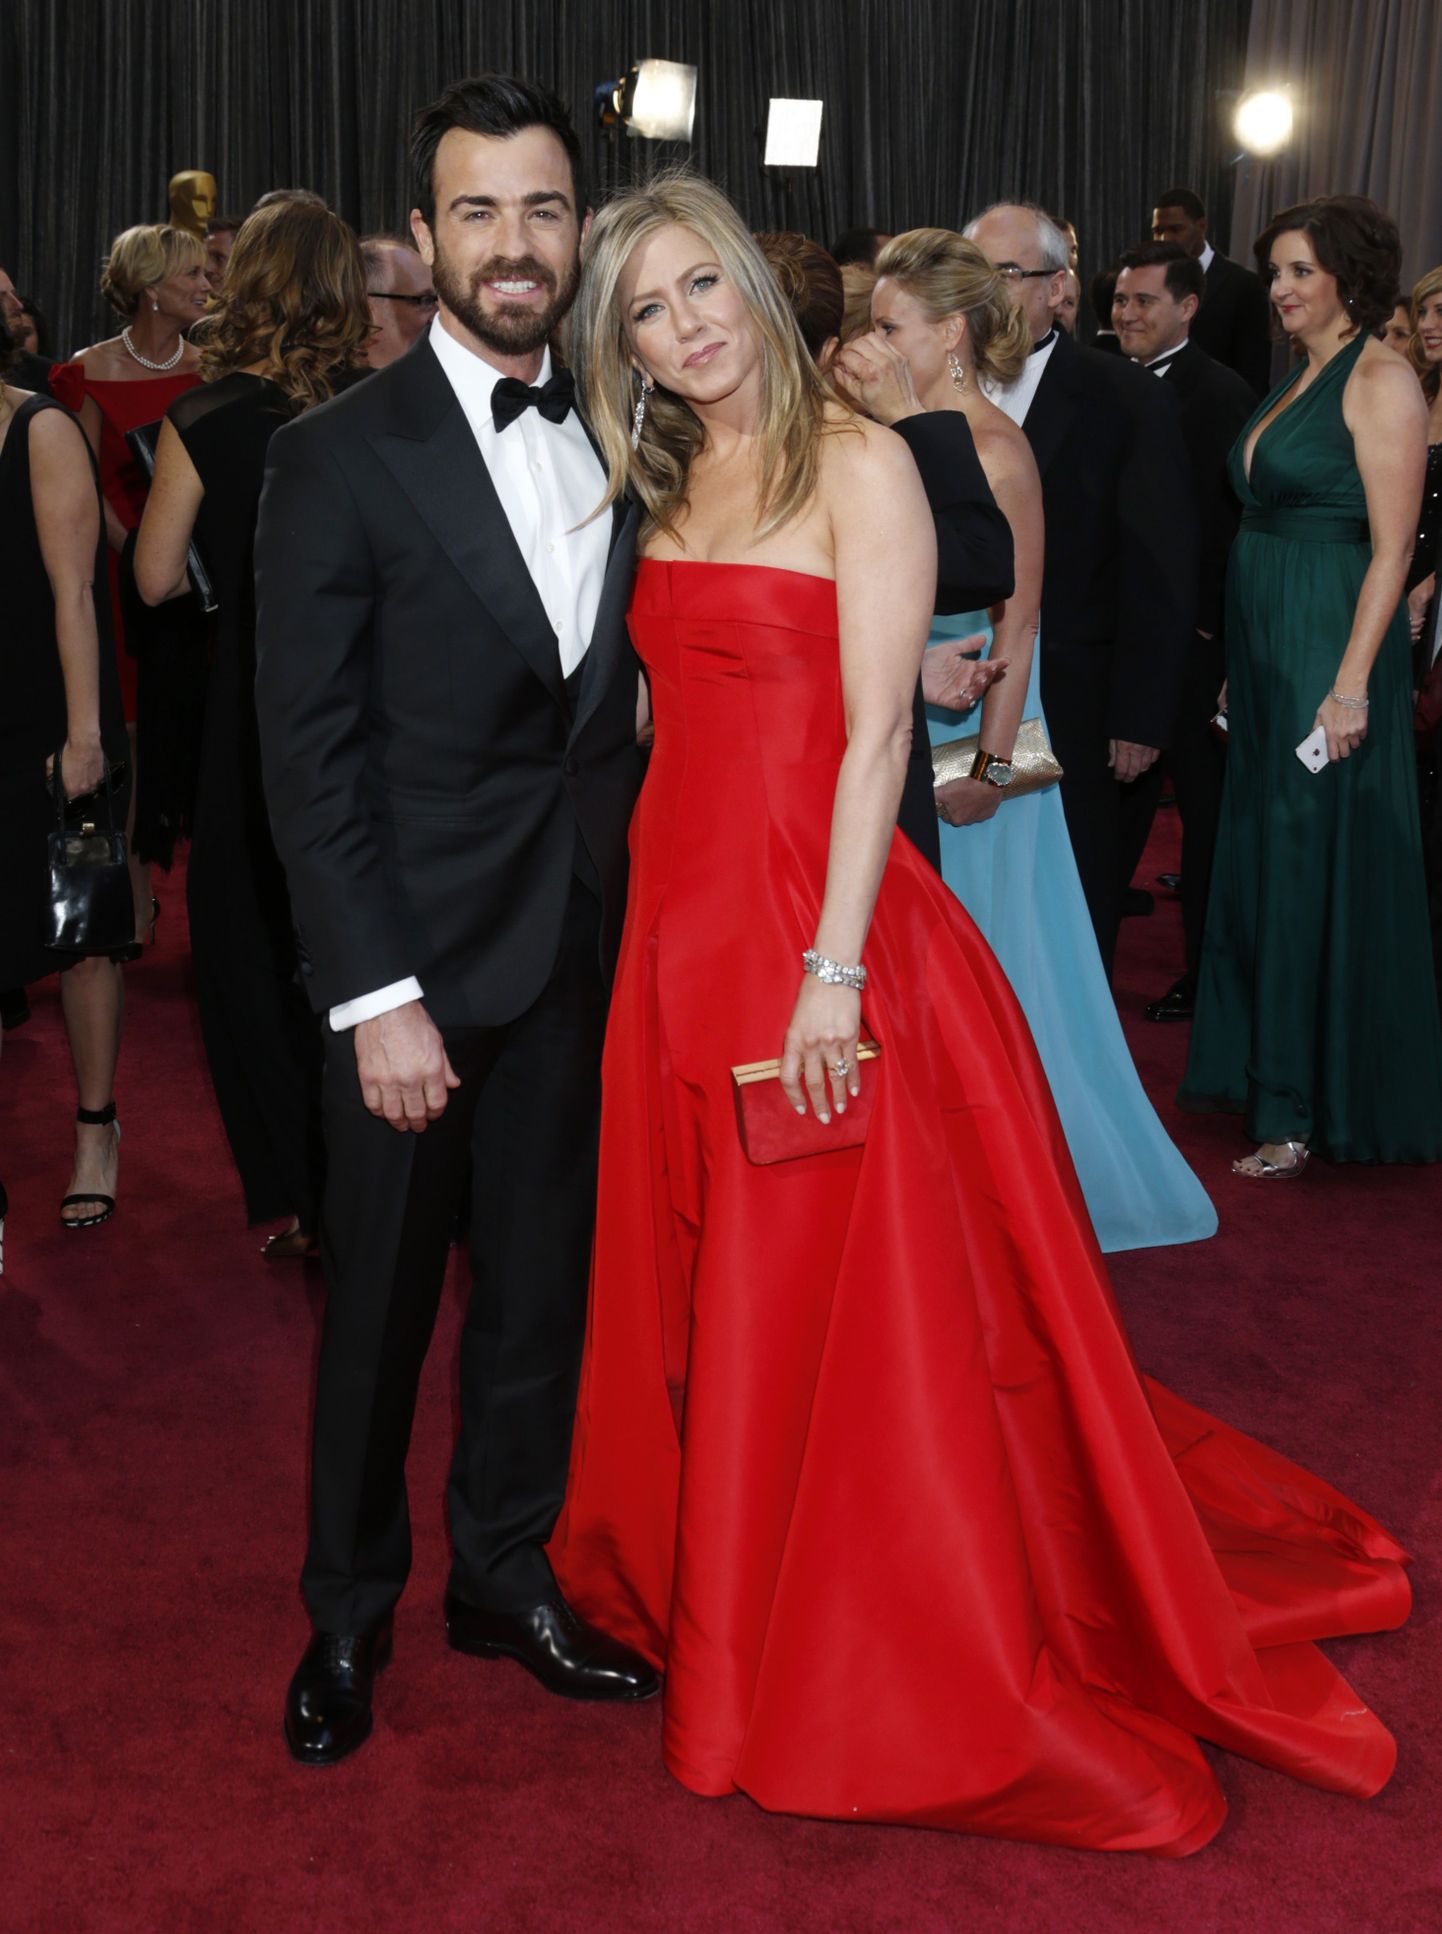 Actors Justin Theroux, left, and Jennifer Aniston arrive at the Oscars at the Dolby Theatre on Sunday Feb. 24, 2013, in Los Angeles. (Photo by Todd Williamson/Invision/AP) / SCANPIX Code: 436